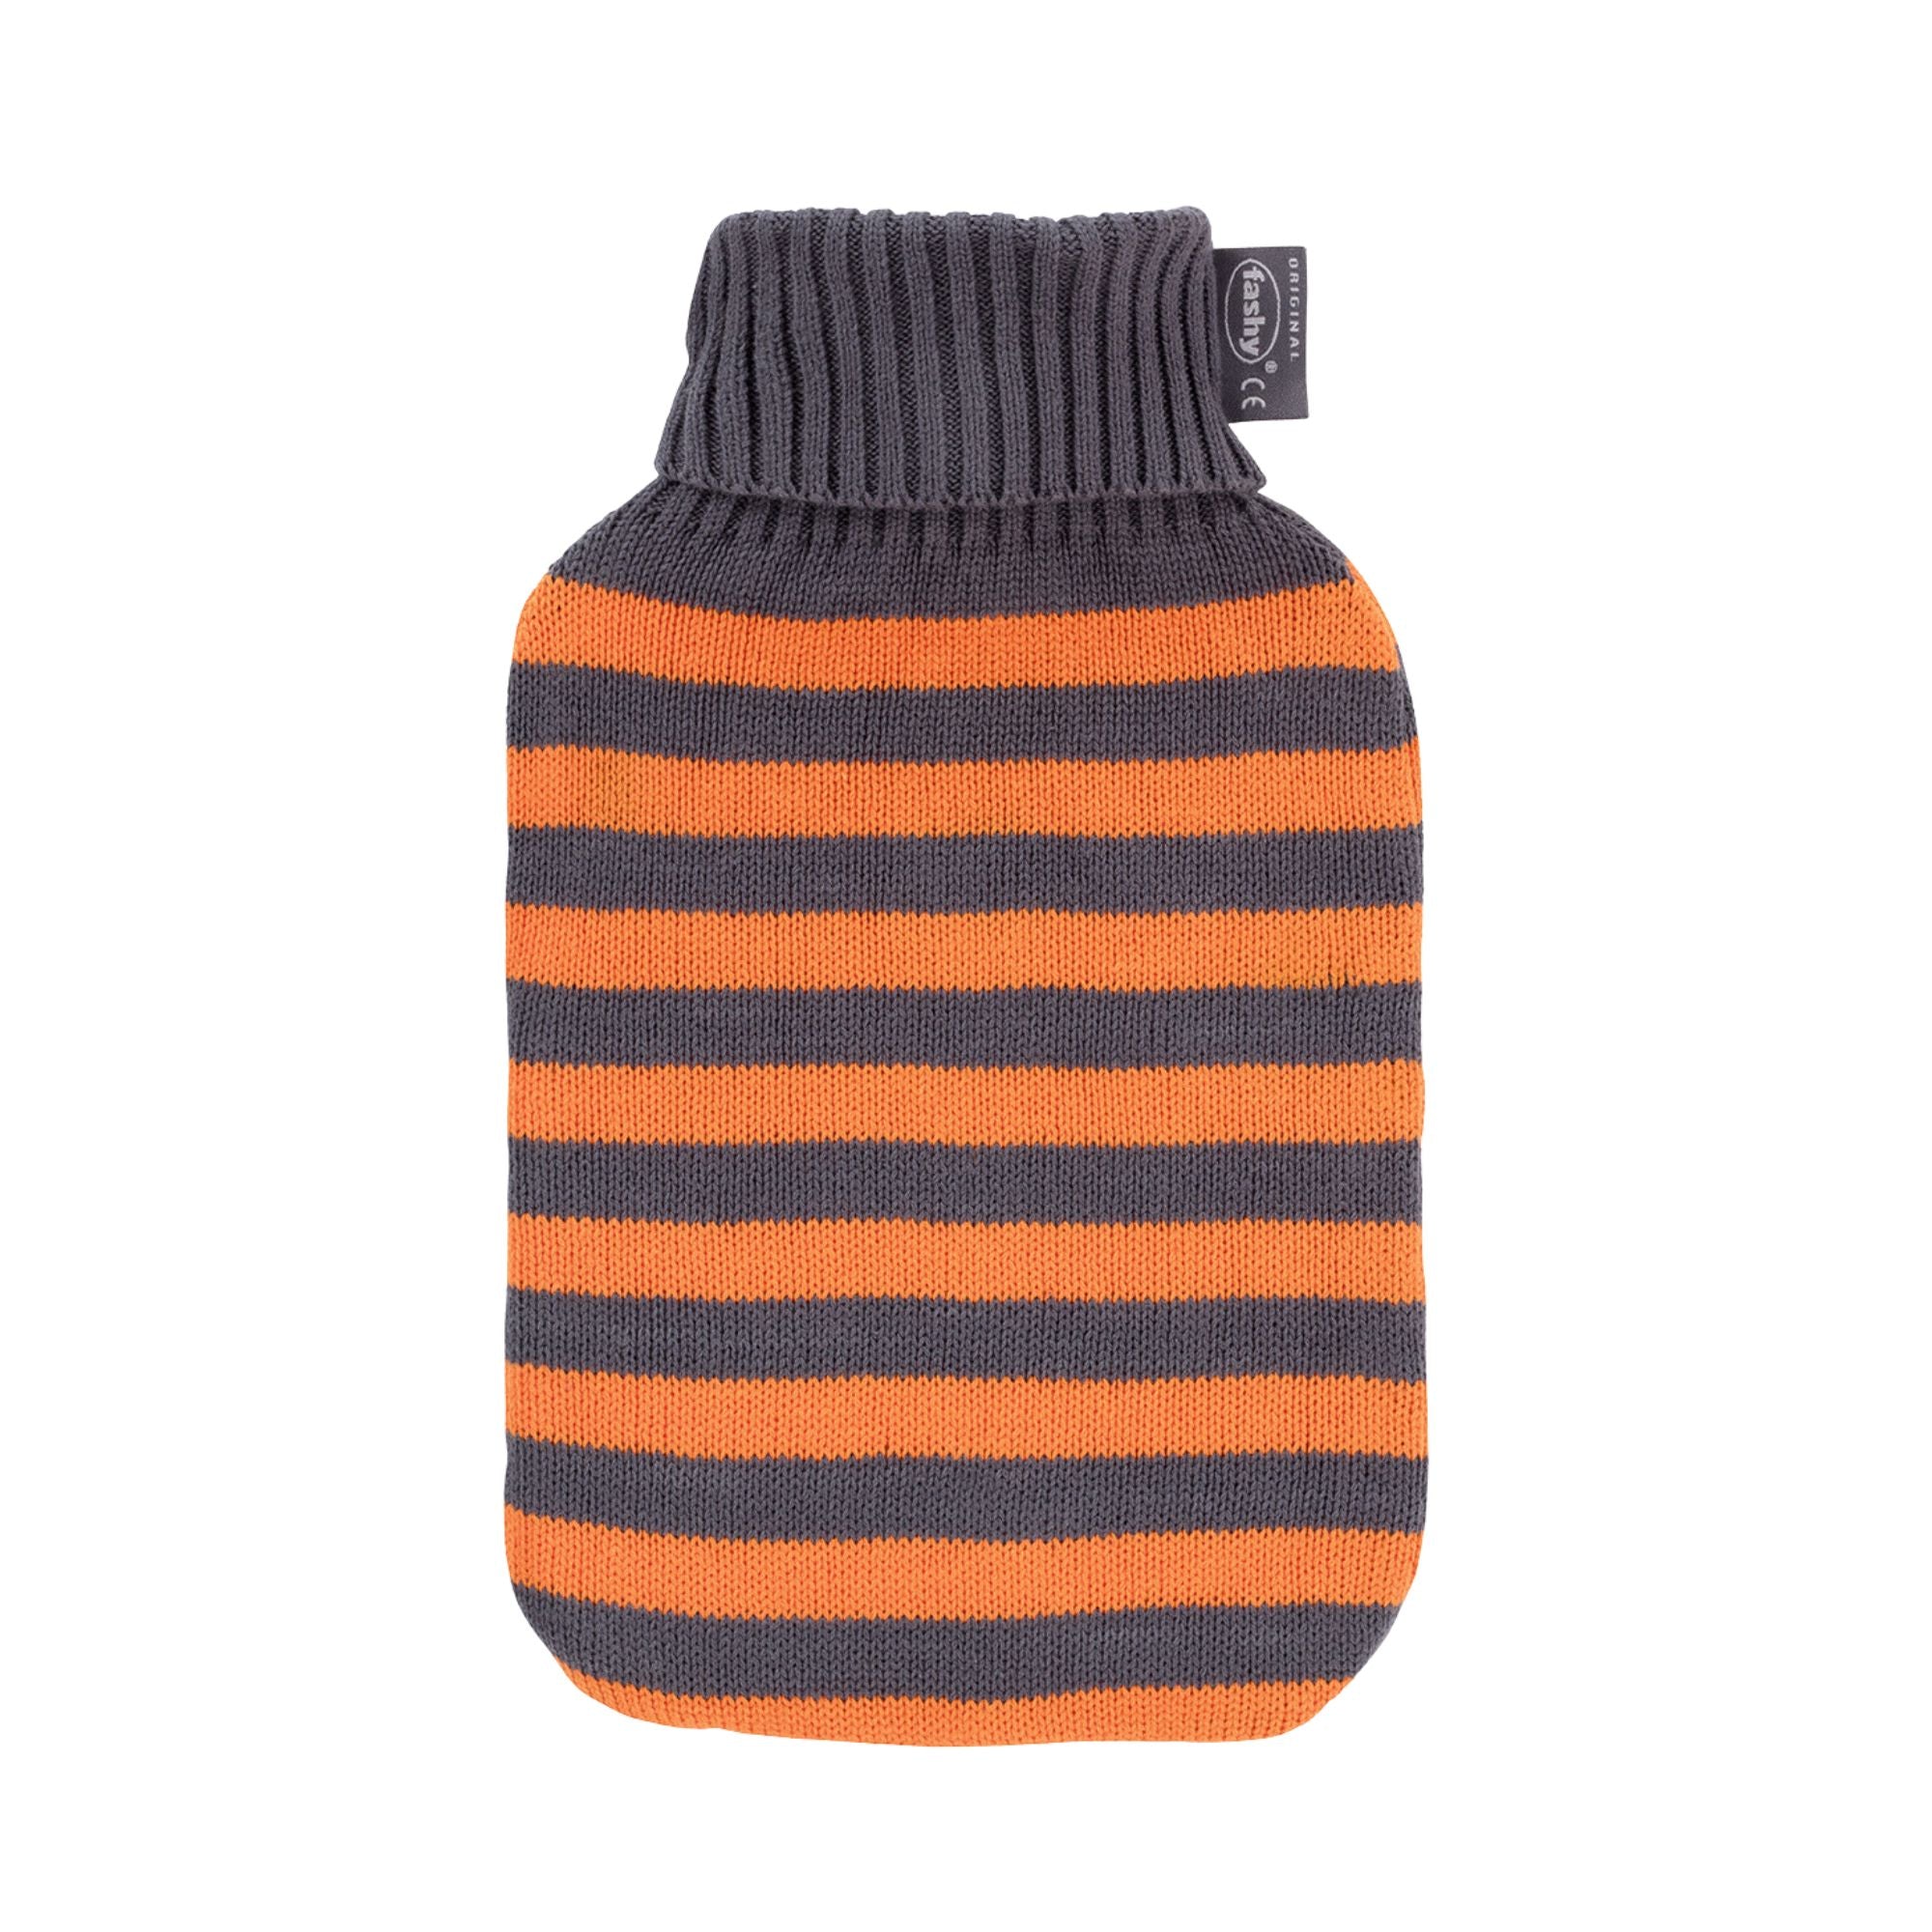 2 Litre Fashy Hot Water Bottle with Grey & Orange Stripe Turtle Neck Knitted Cotton Cover